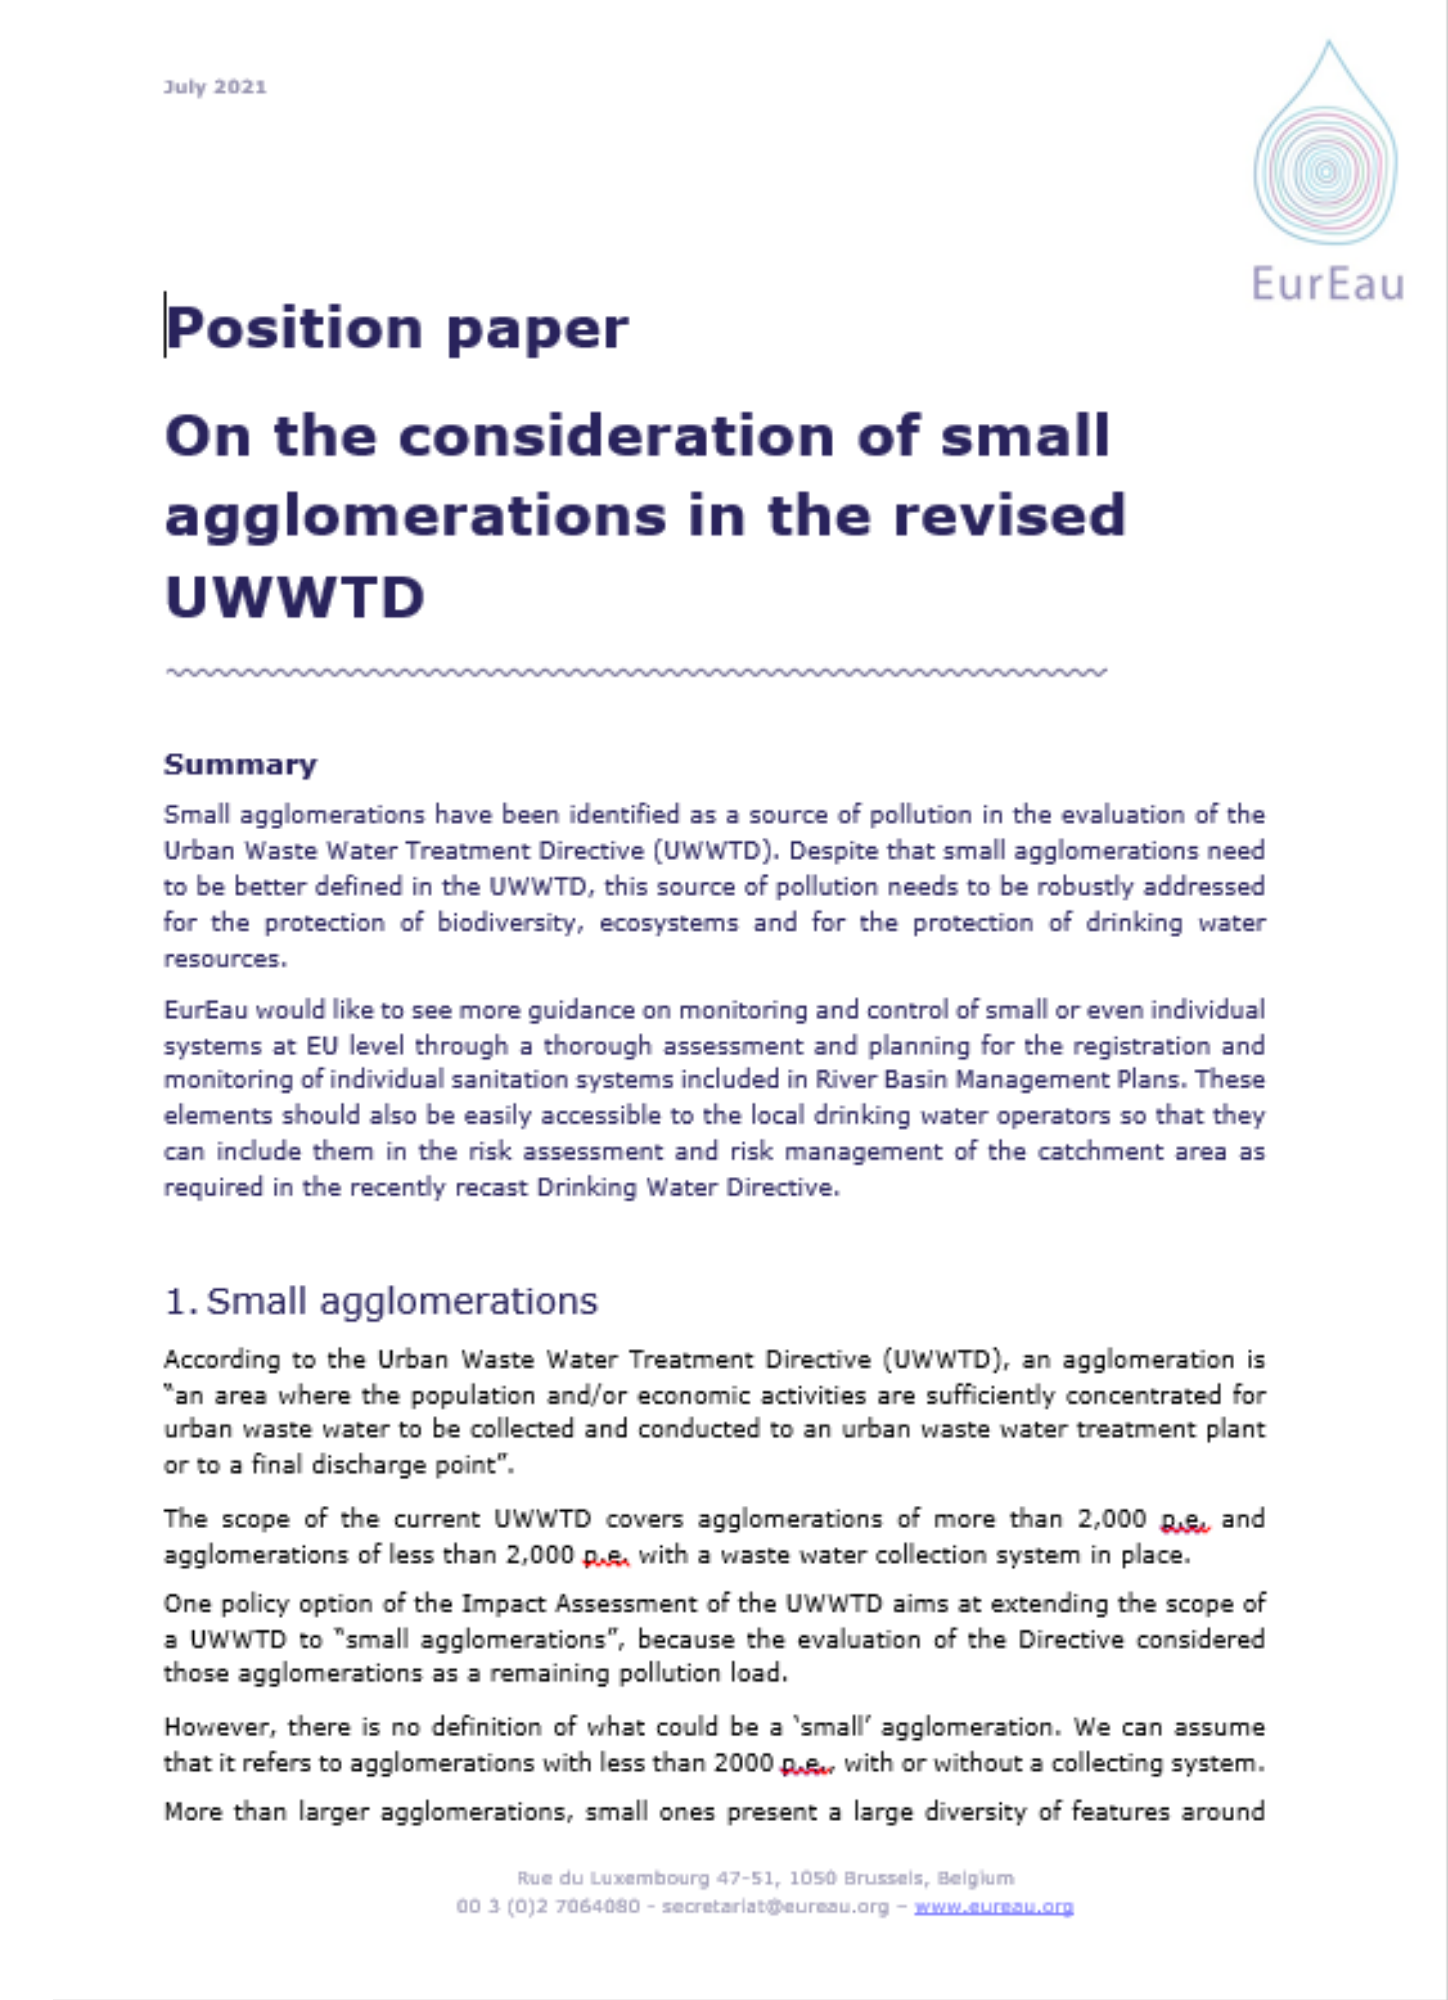 Position paper on the consideration of small agglomerations in the UWWTD